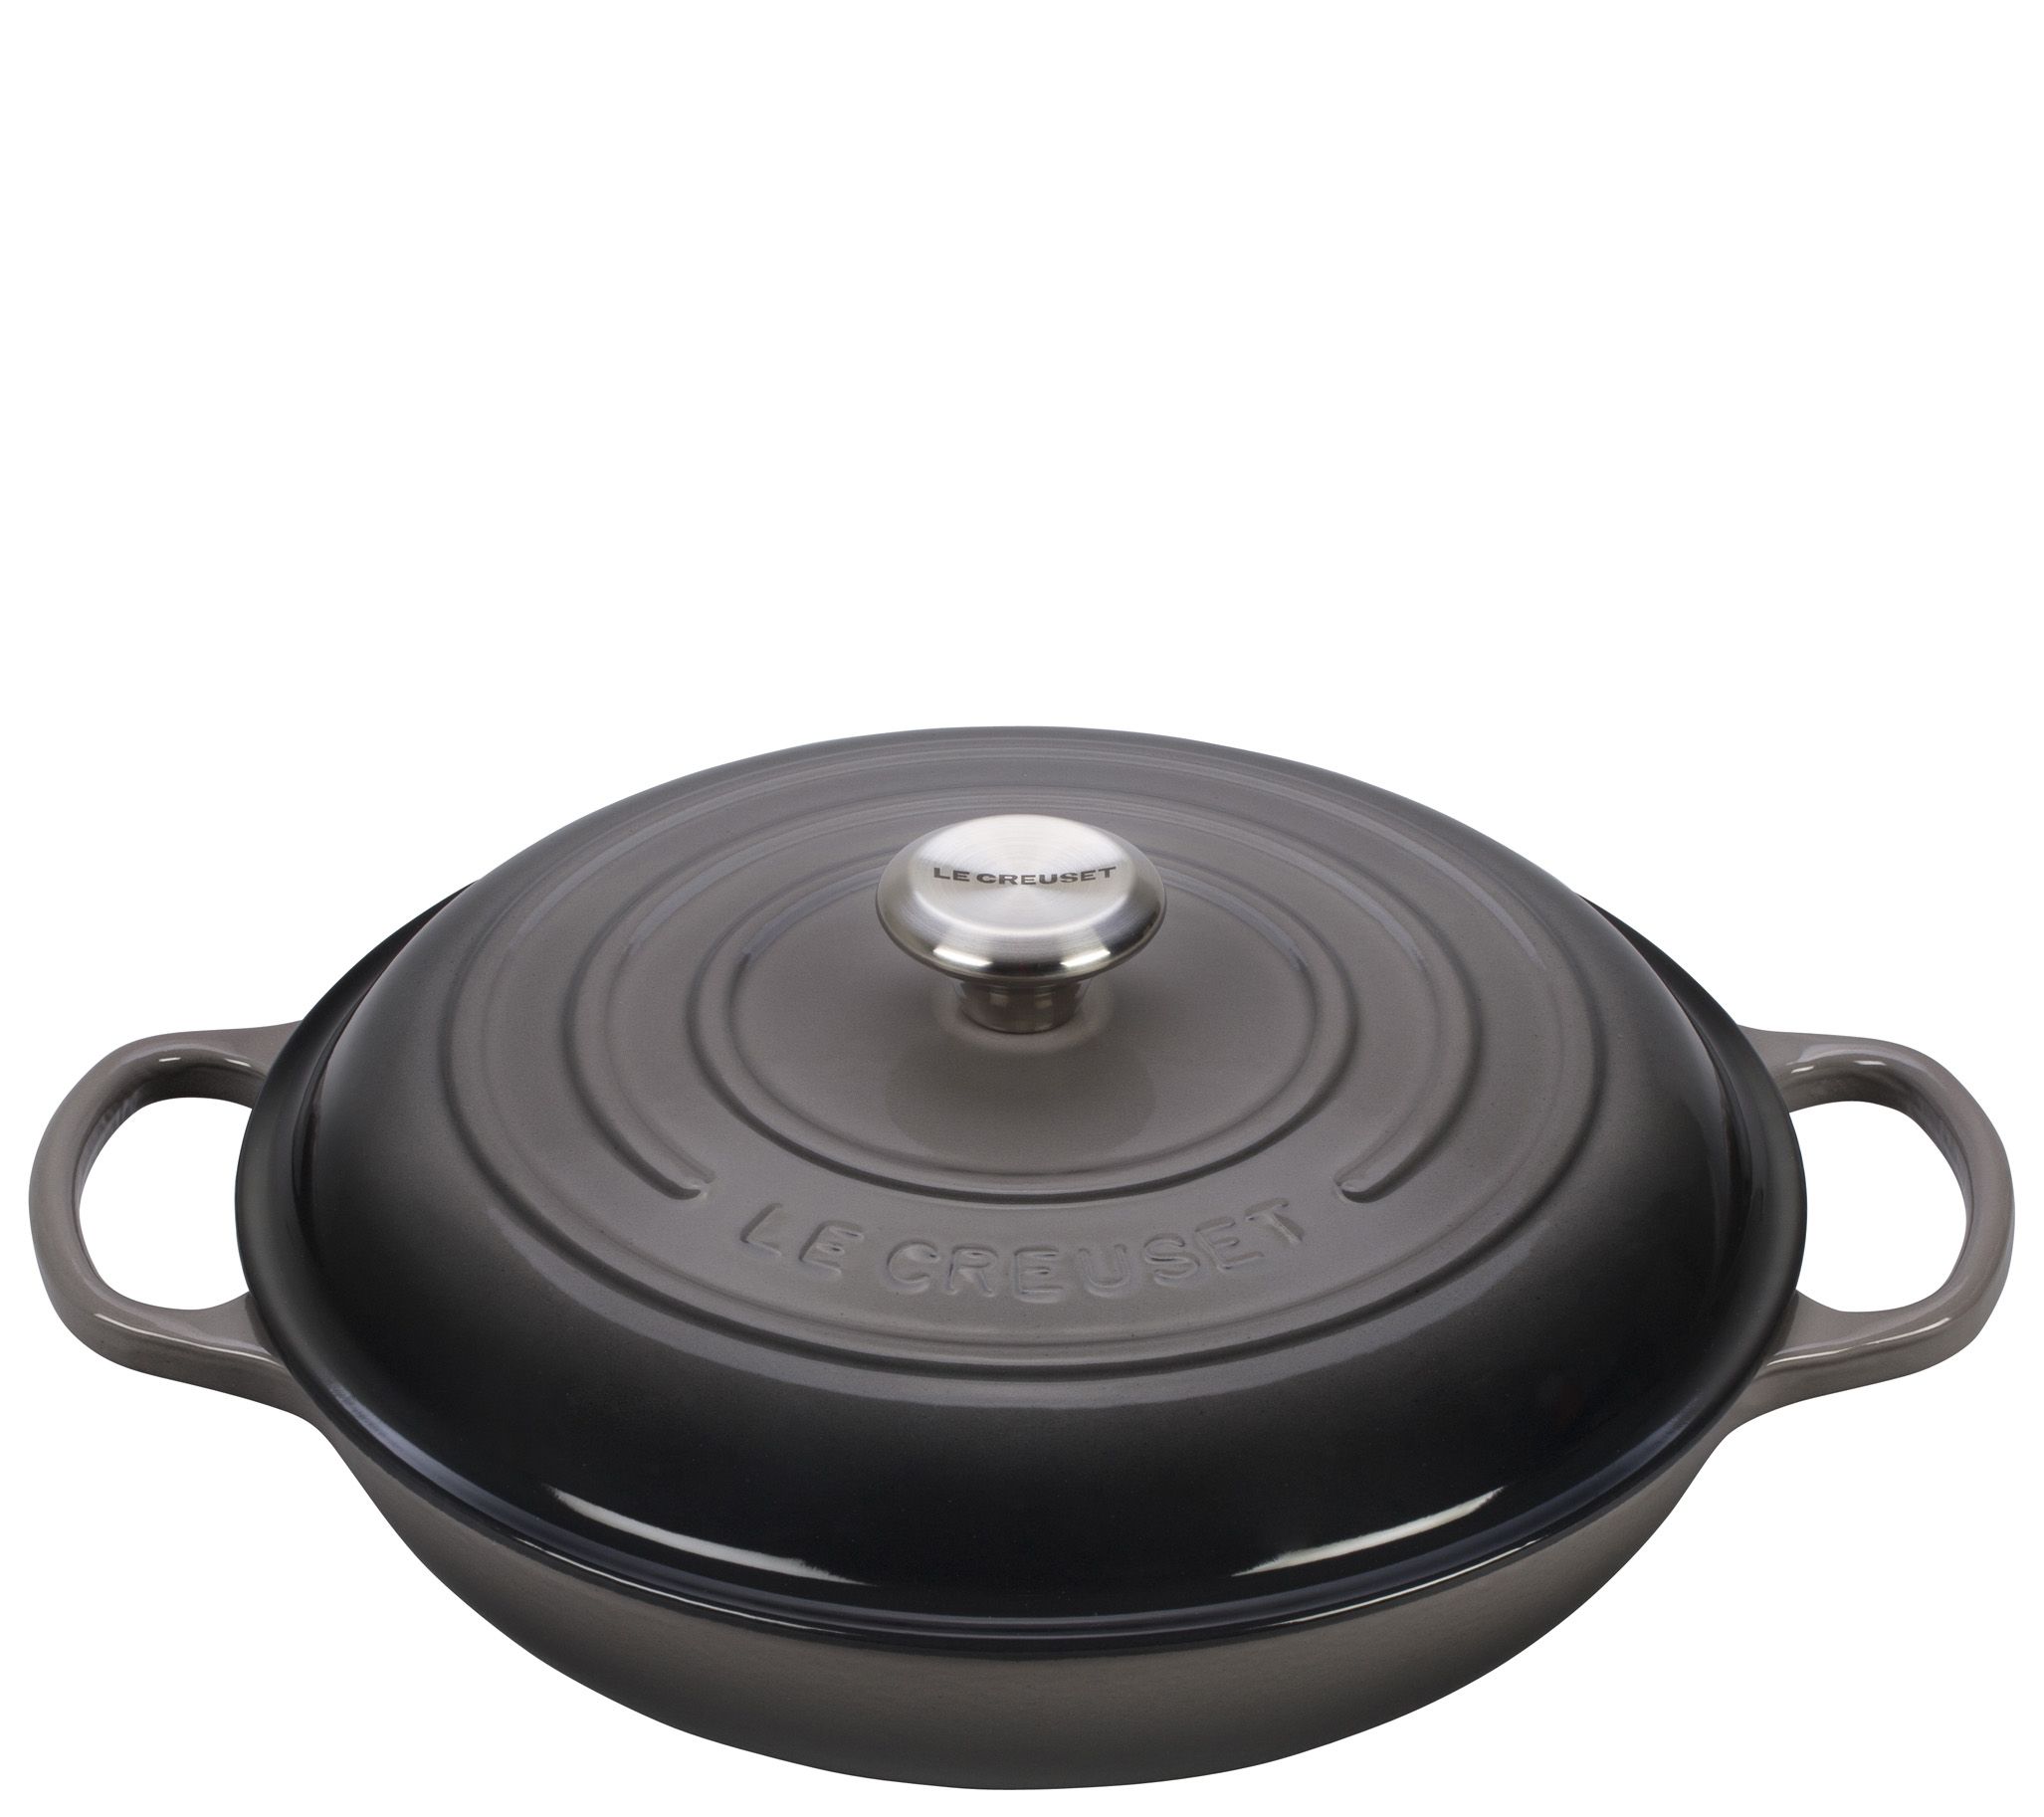 QVC Knocks the Price of This Le Creuset Dutch Oven Down to $270 - CNET